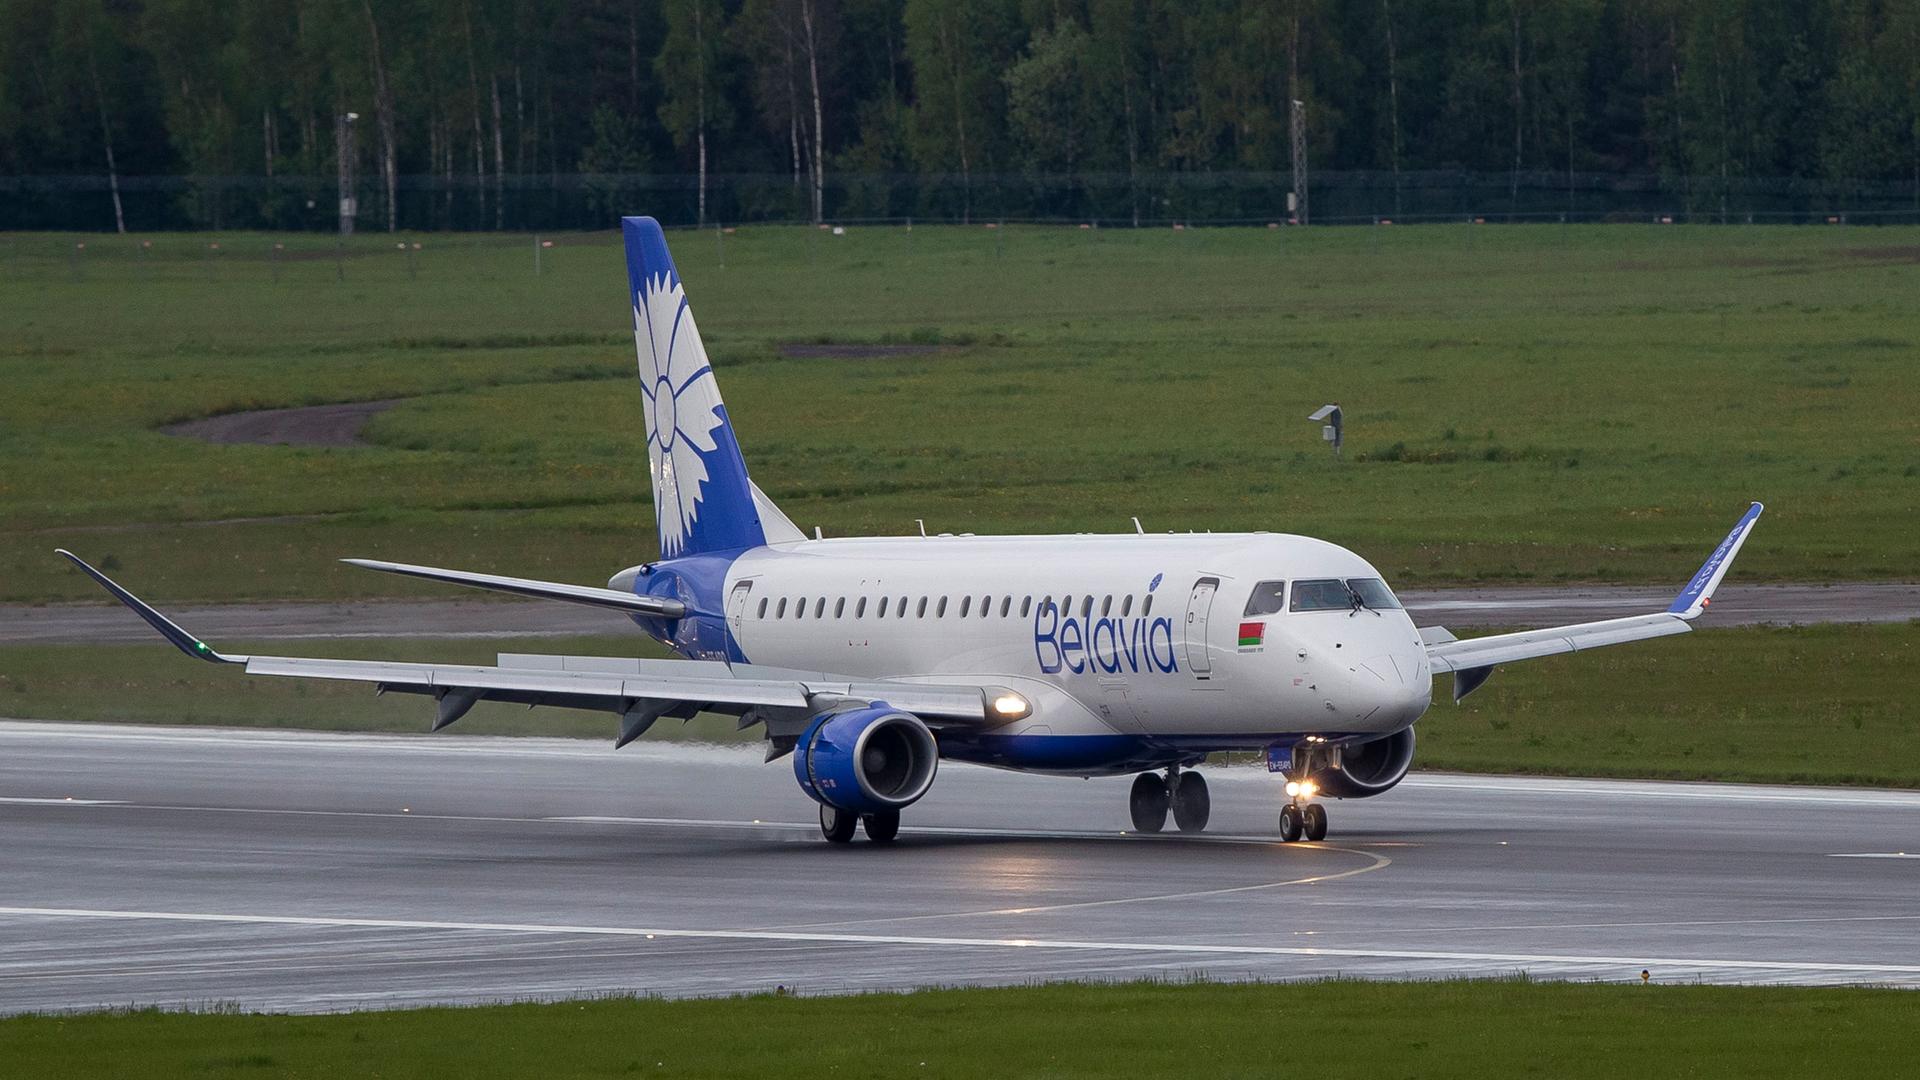 A Belavia plane lands at the International Airport outside Vilnius, Lithuania